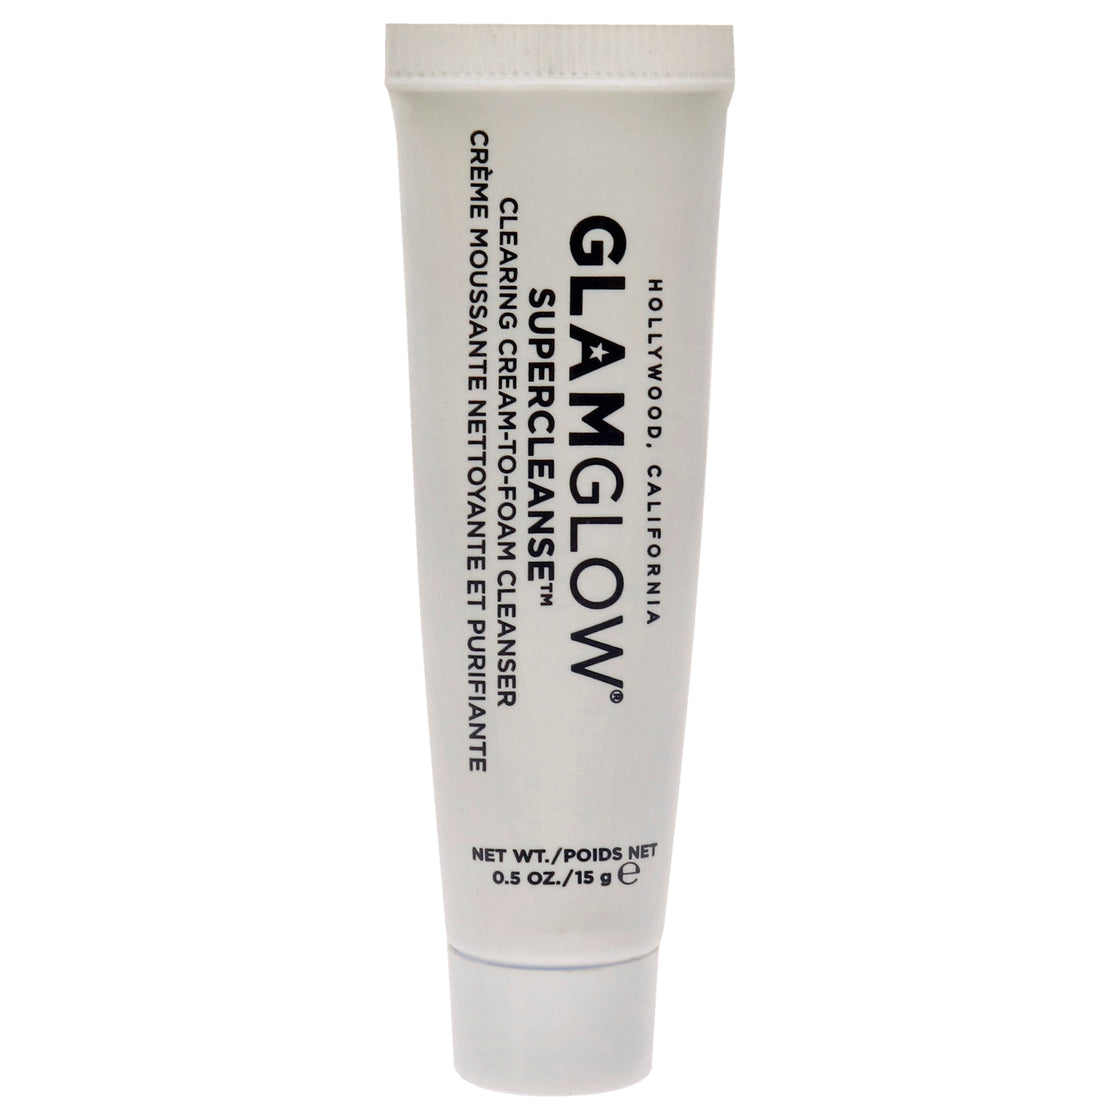 Supercleanse Clearing Cream-to-Foam Cleanser by Glamglow for Unisex - 0.5 oz Cleanser